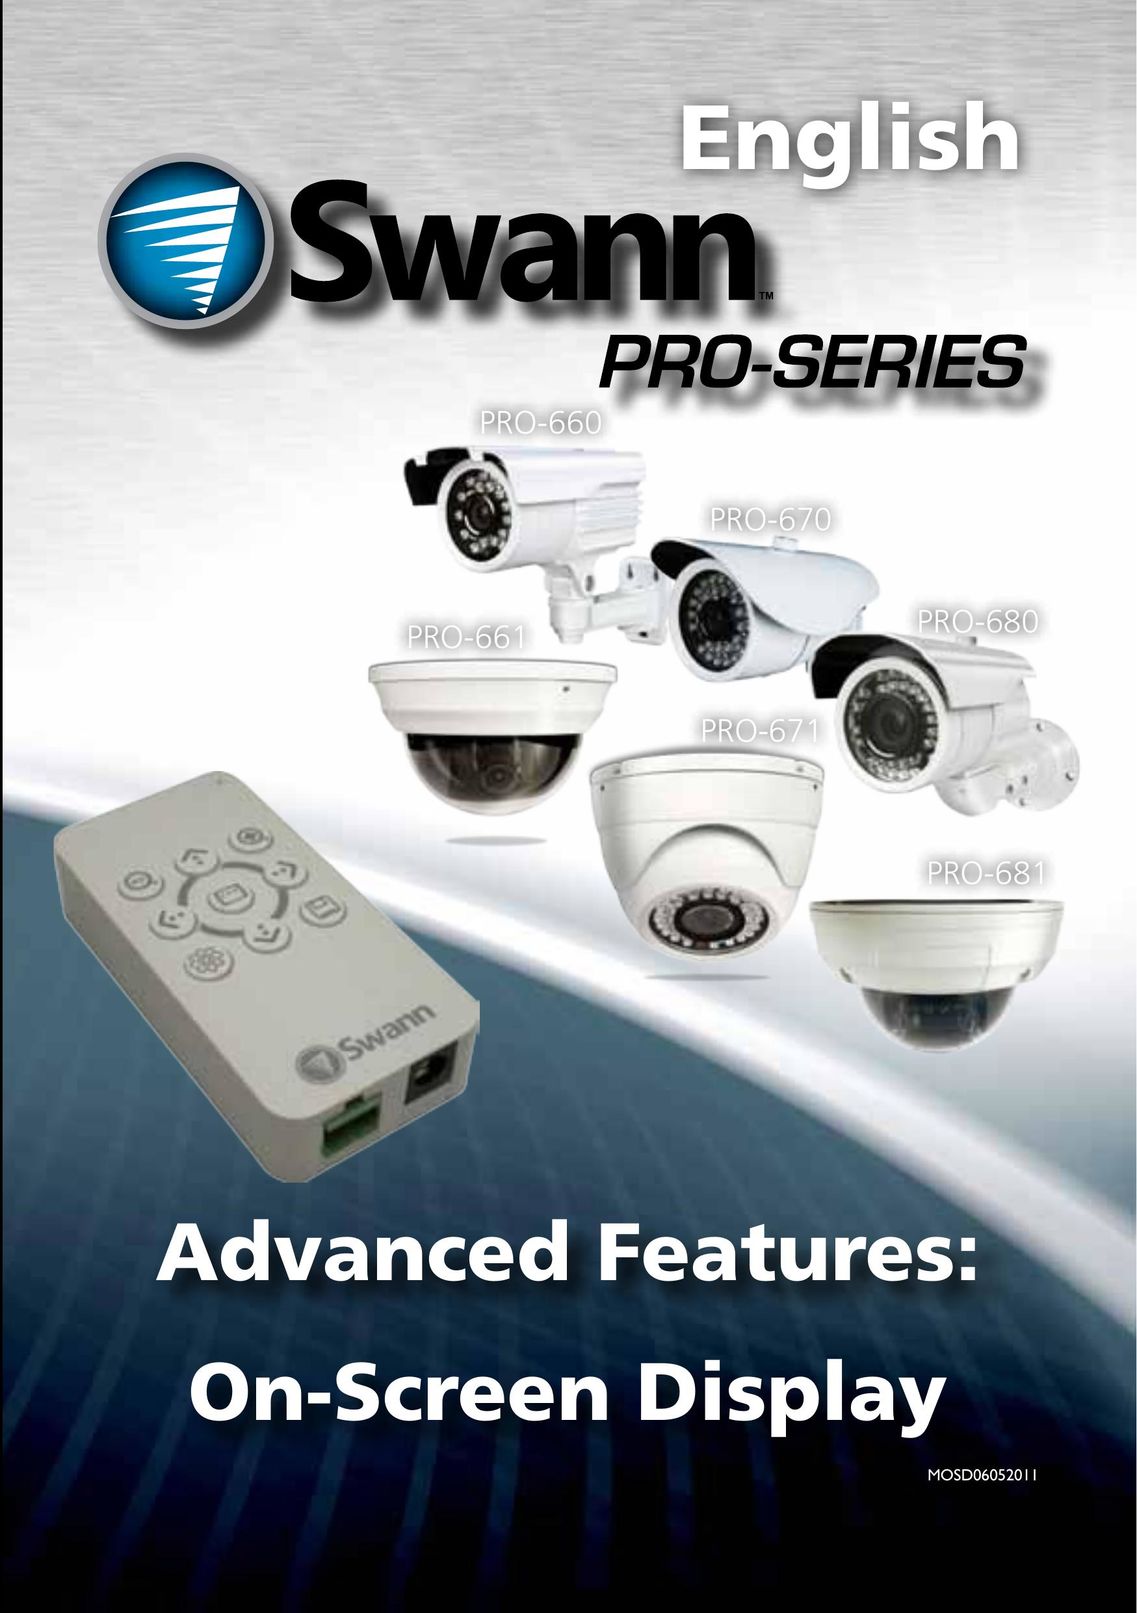 Swann PRO-661 Home Security System User Manual